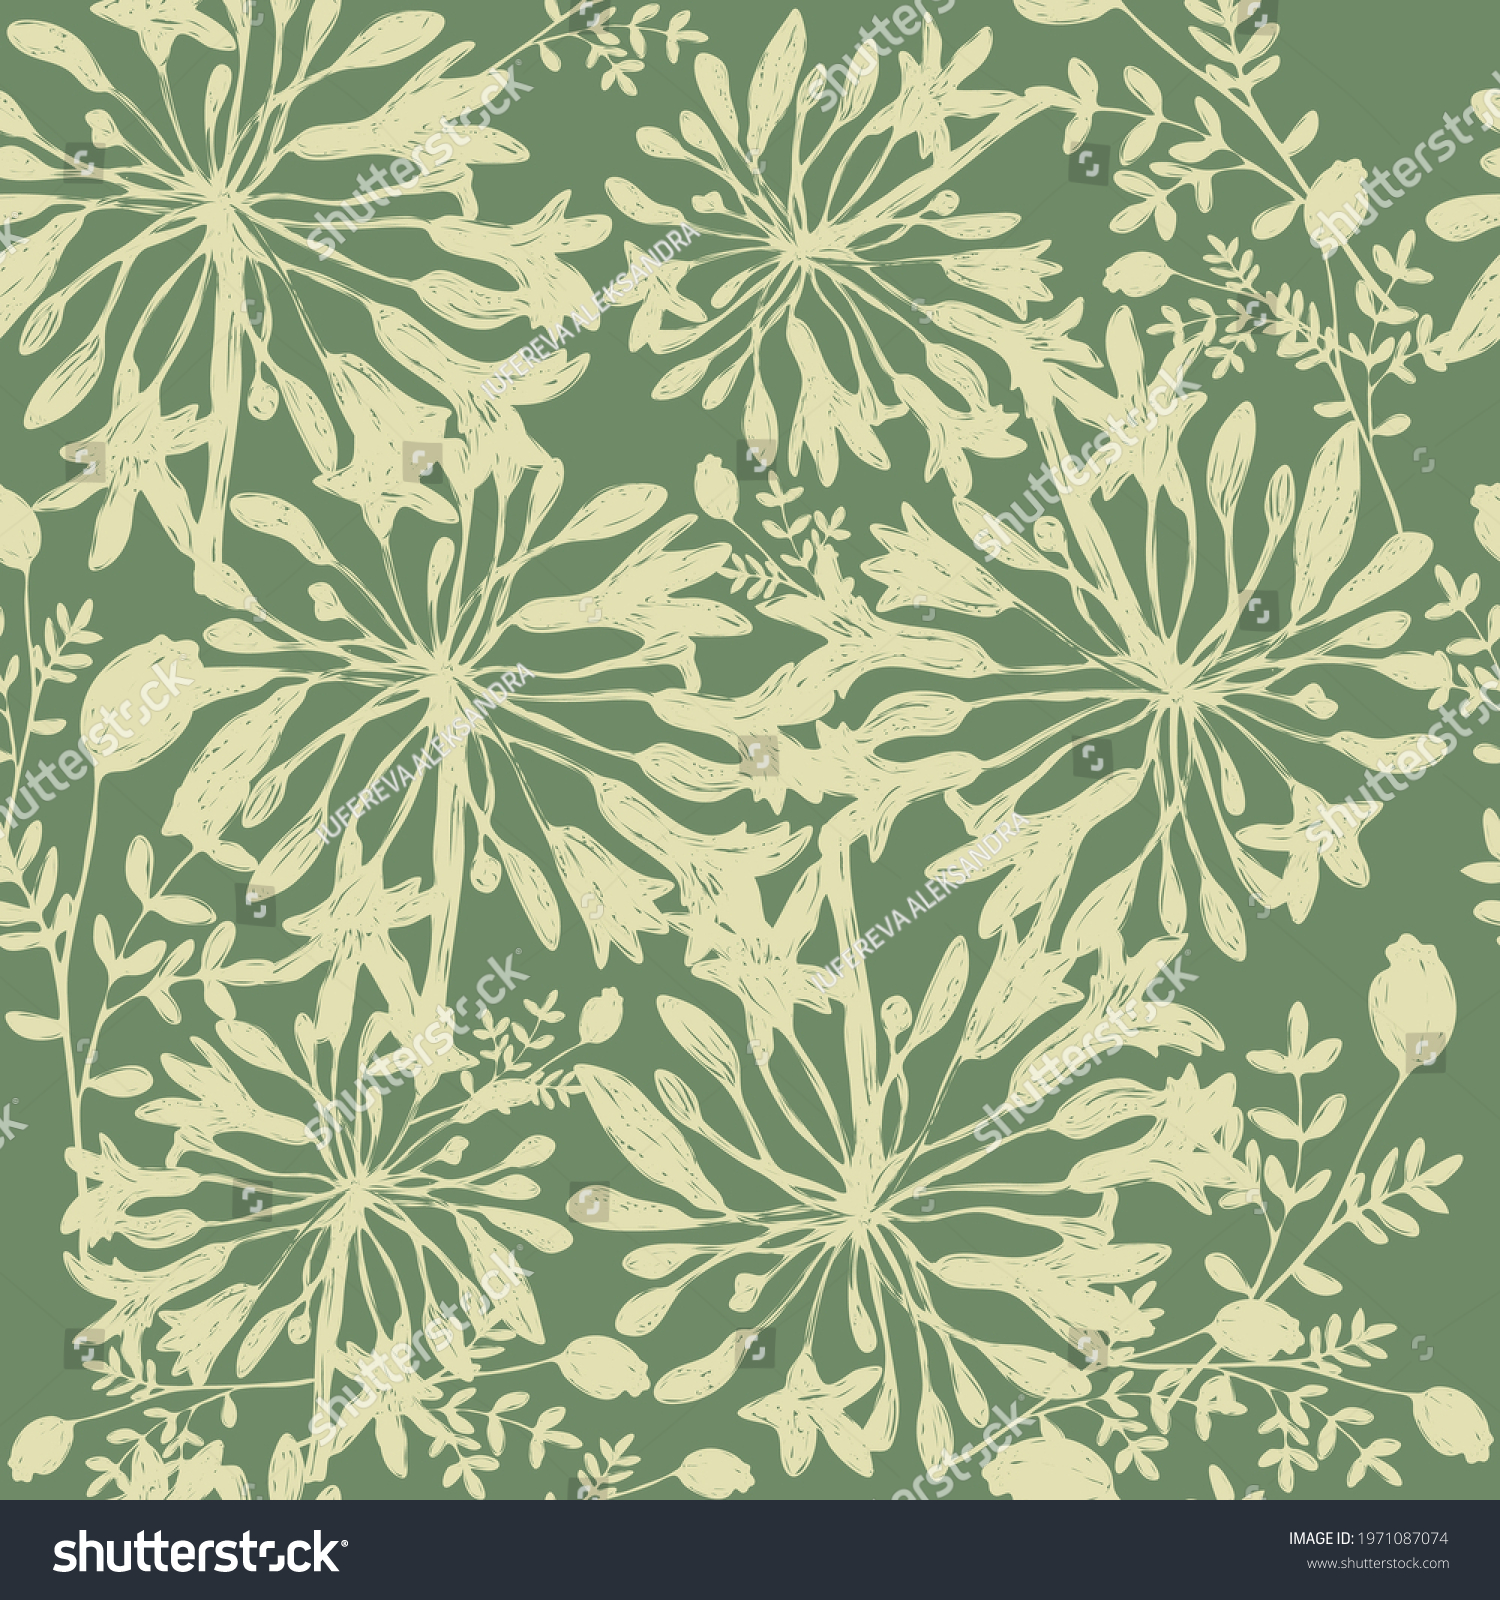 SVG of vector illustration seamless pattern,light green agapanthus flowers on a dark green background,branches of grass and a box of poppy,for wallpaper,fabric or furniture svg